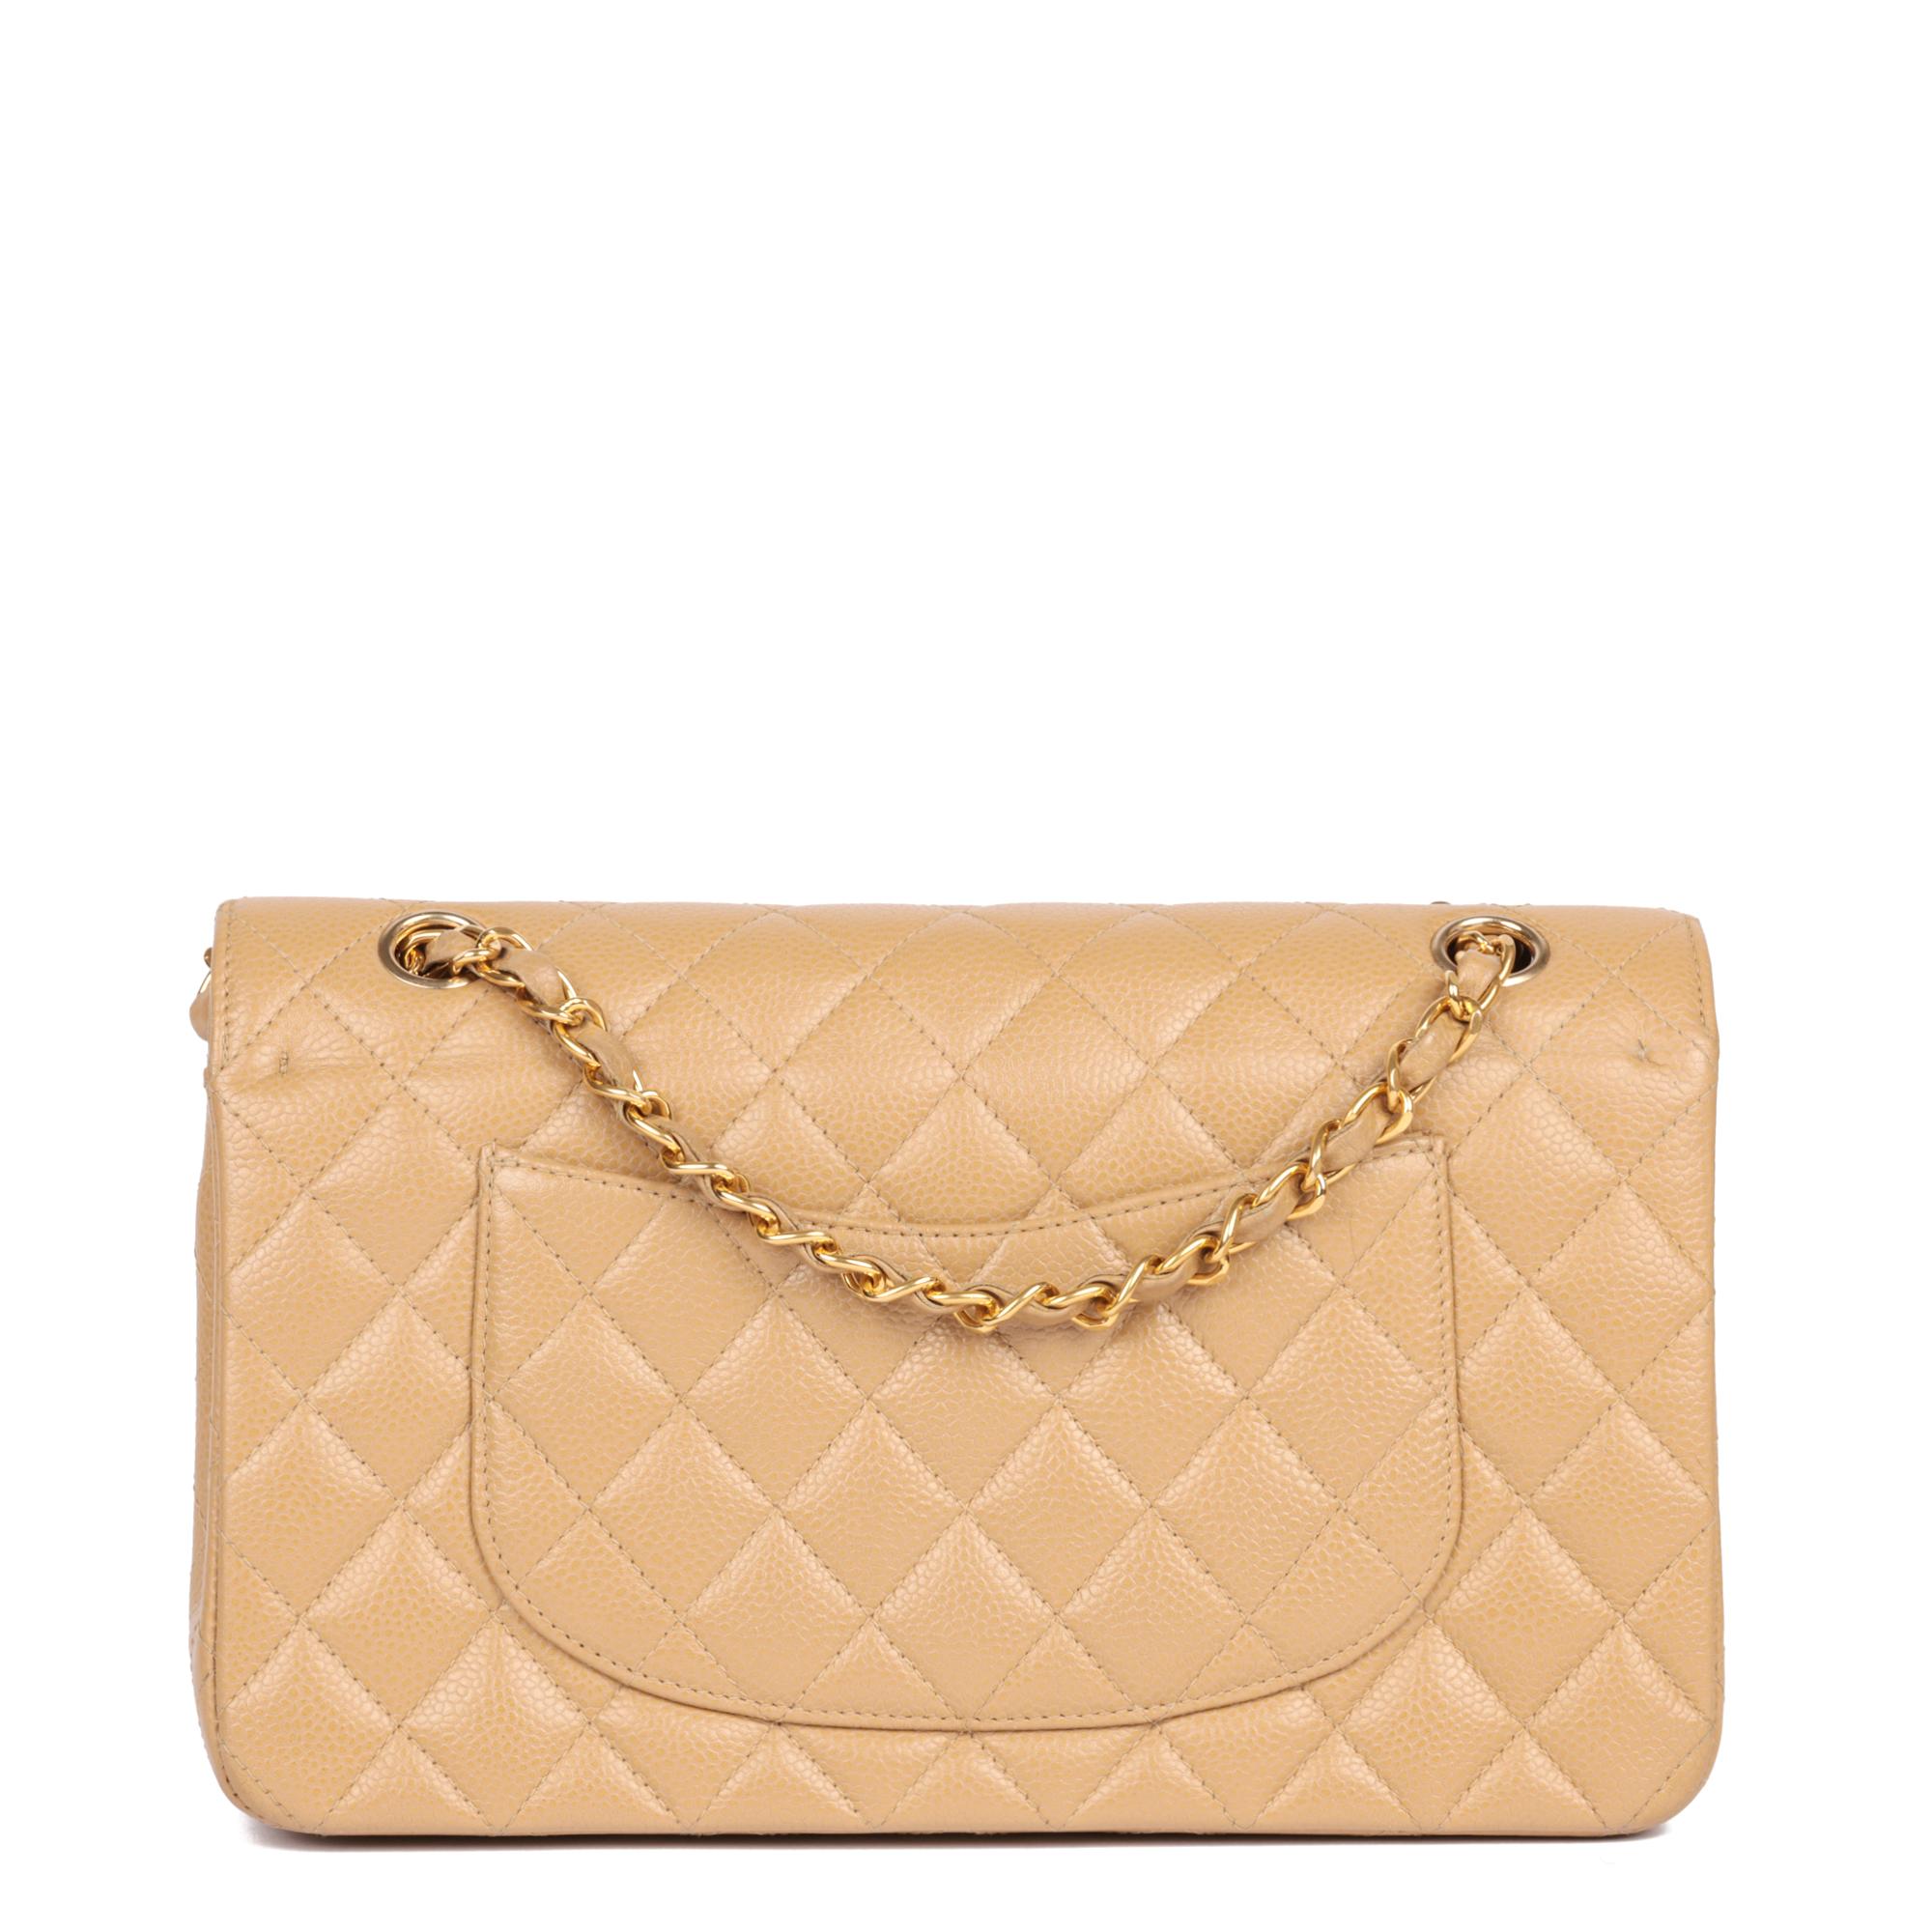 CHANEL Beige Quilted Caviar Leather Medium Classic Double Flap Bag  1